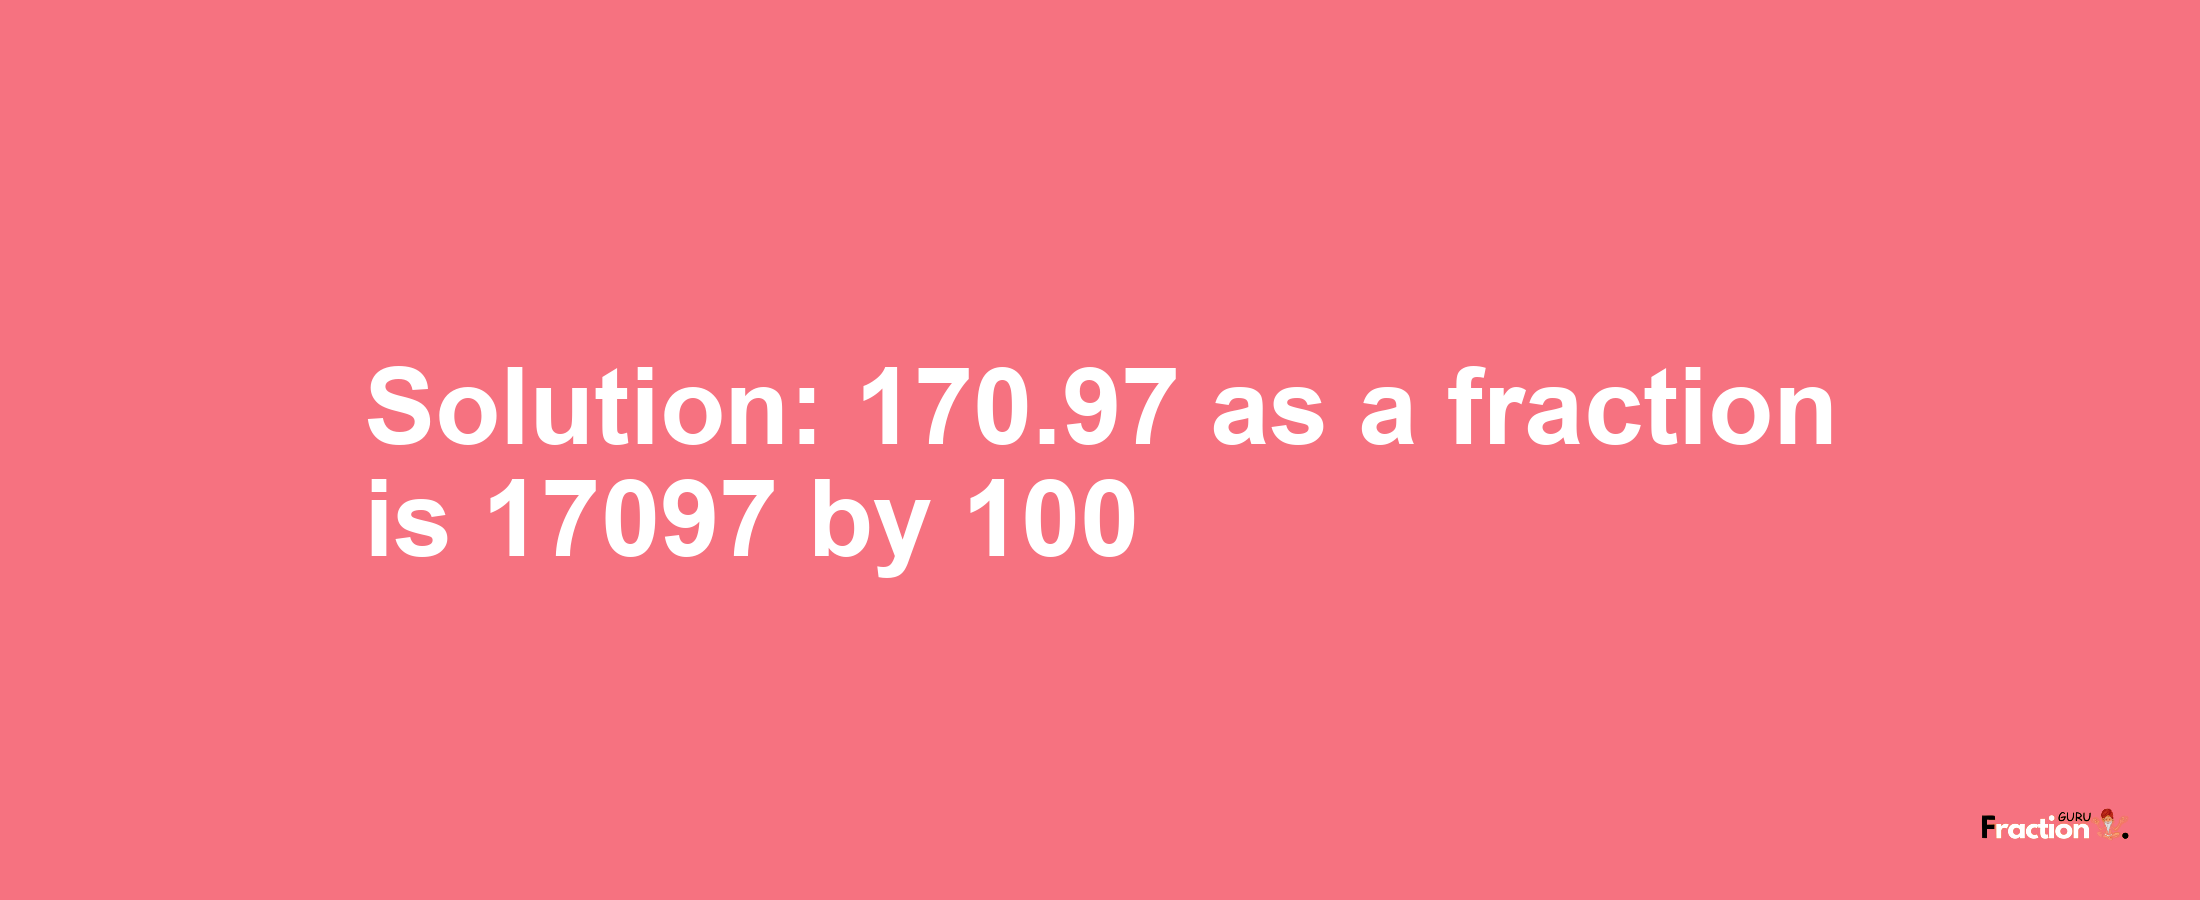 Solution:170.97 as a fraction is 17097/100